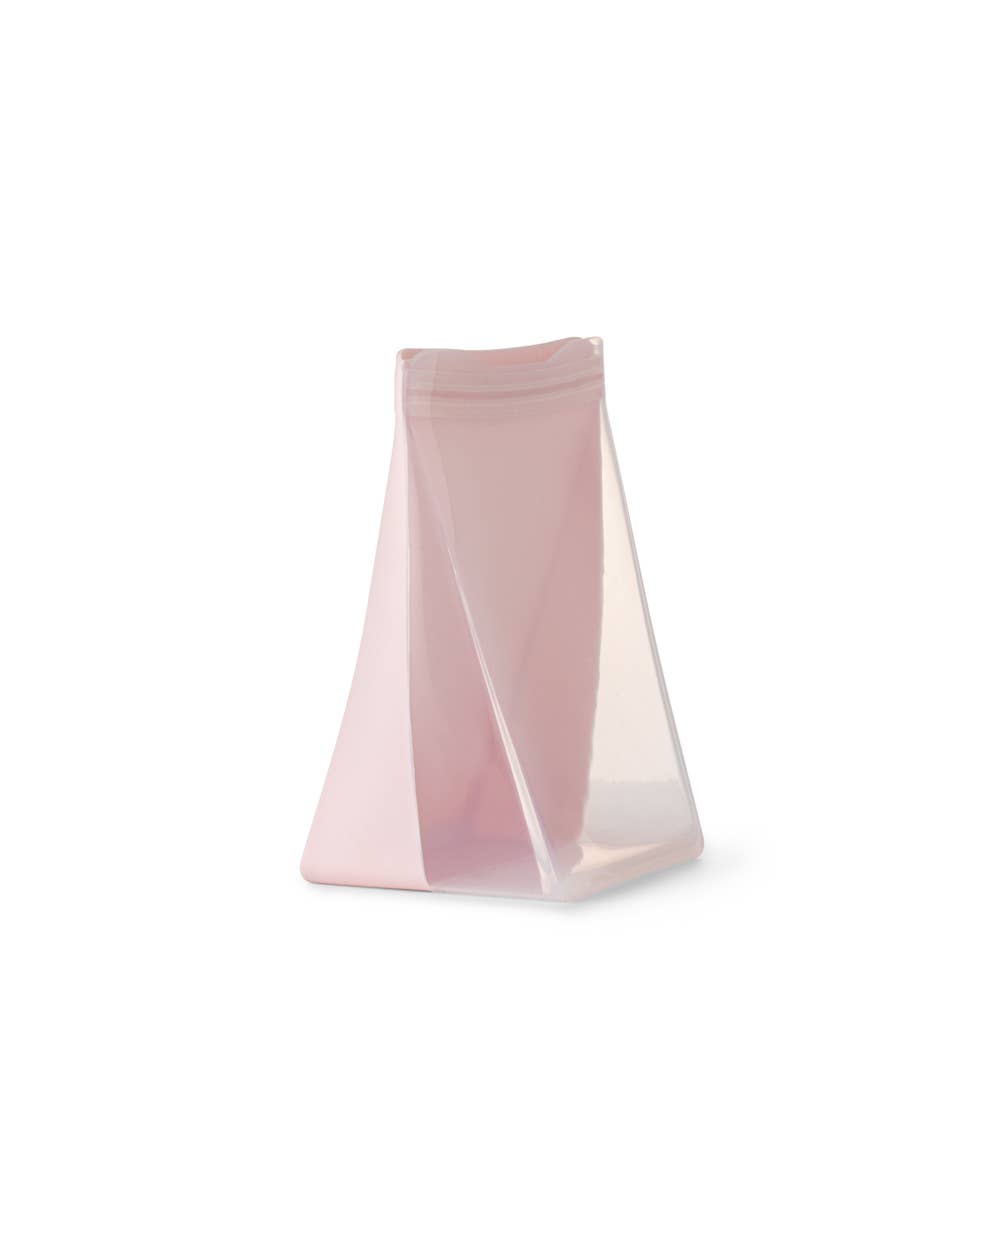 W&P - Silicone Reusable Bag Stand Up - 36oz: Mint